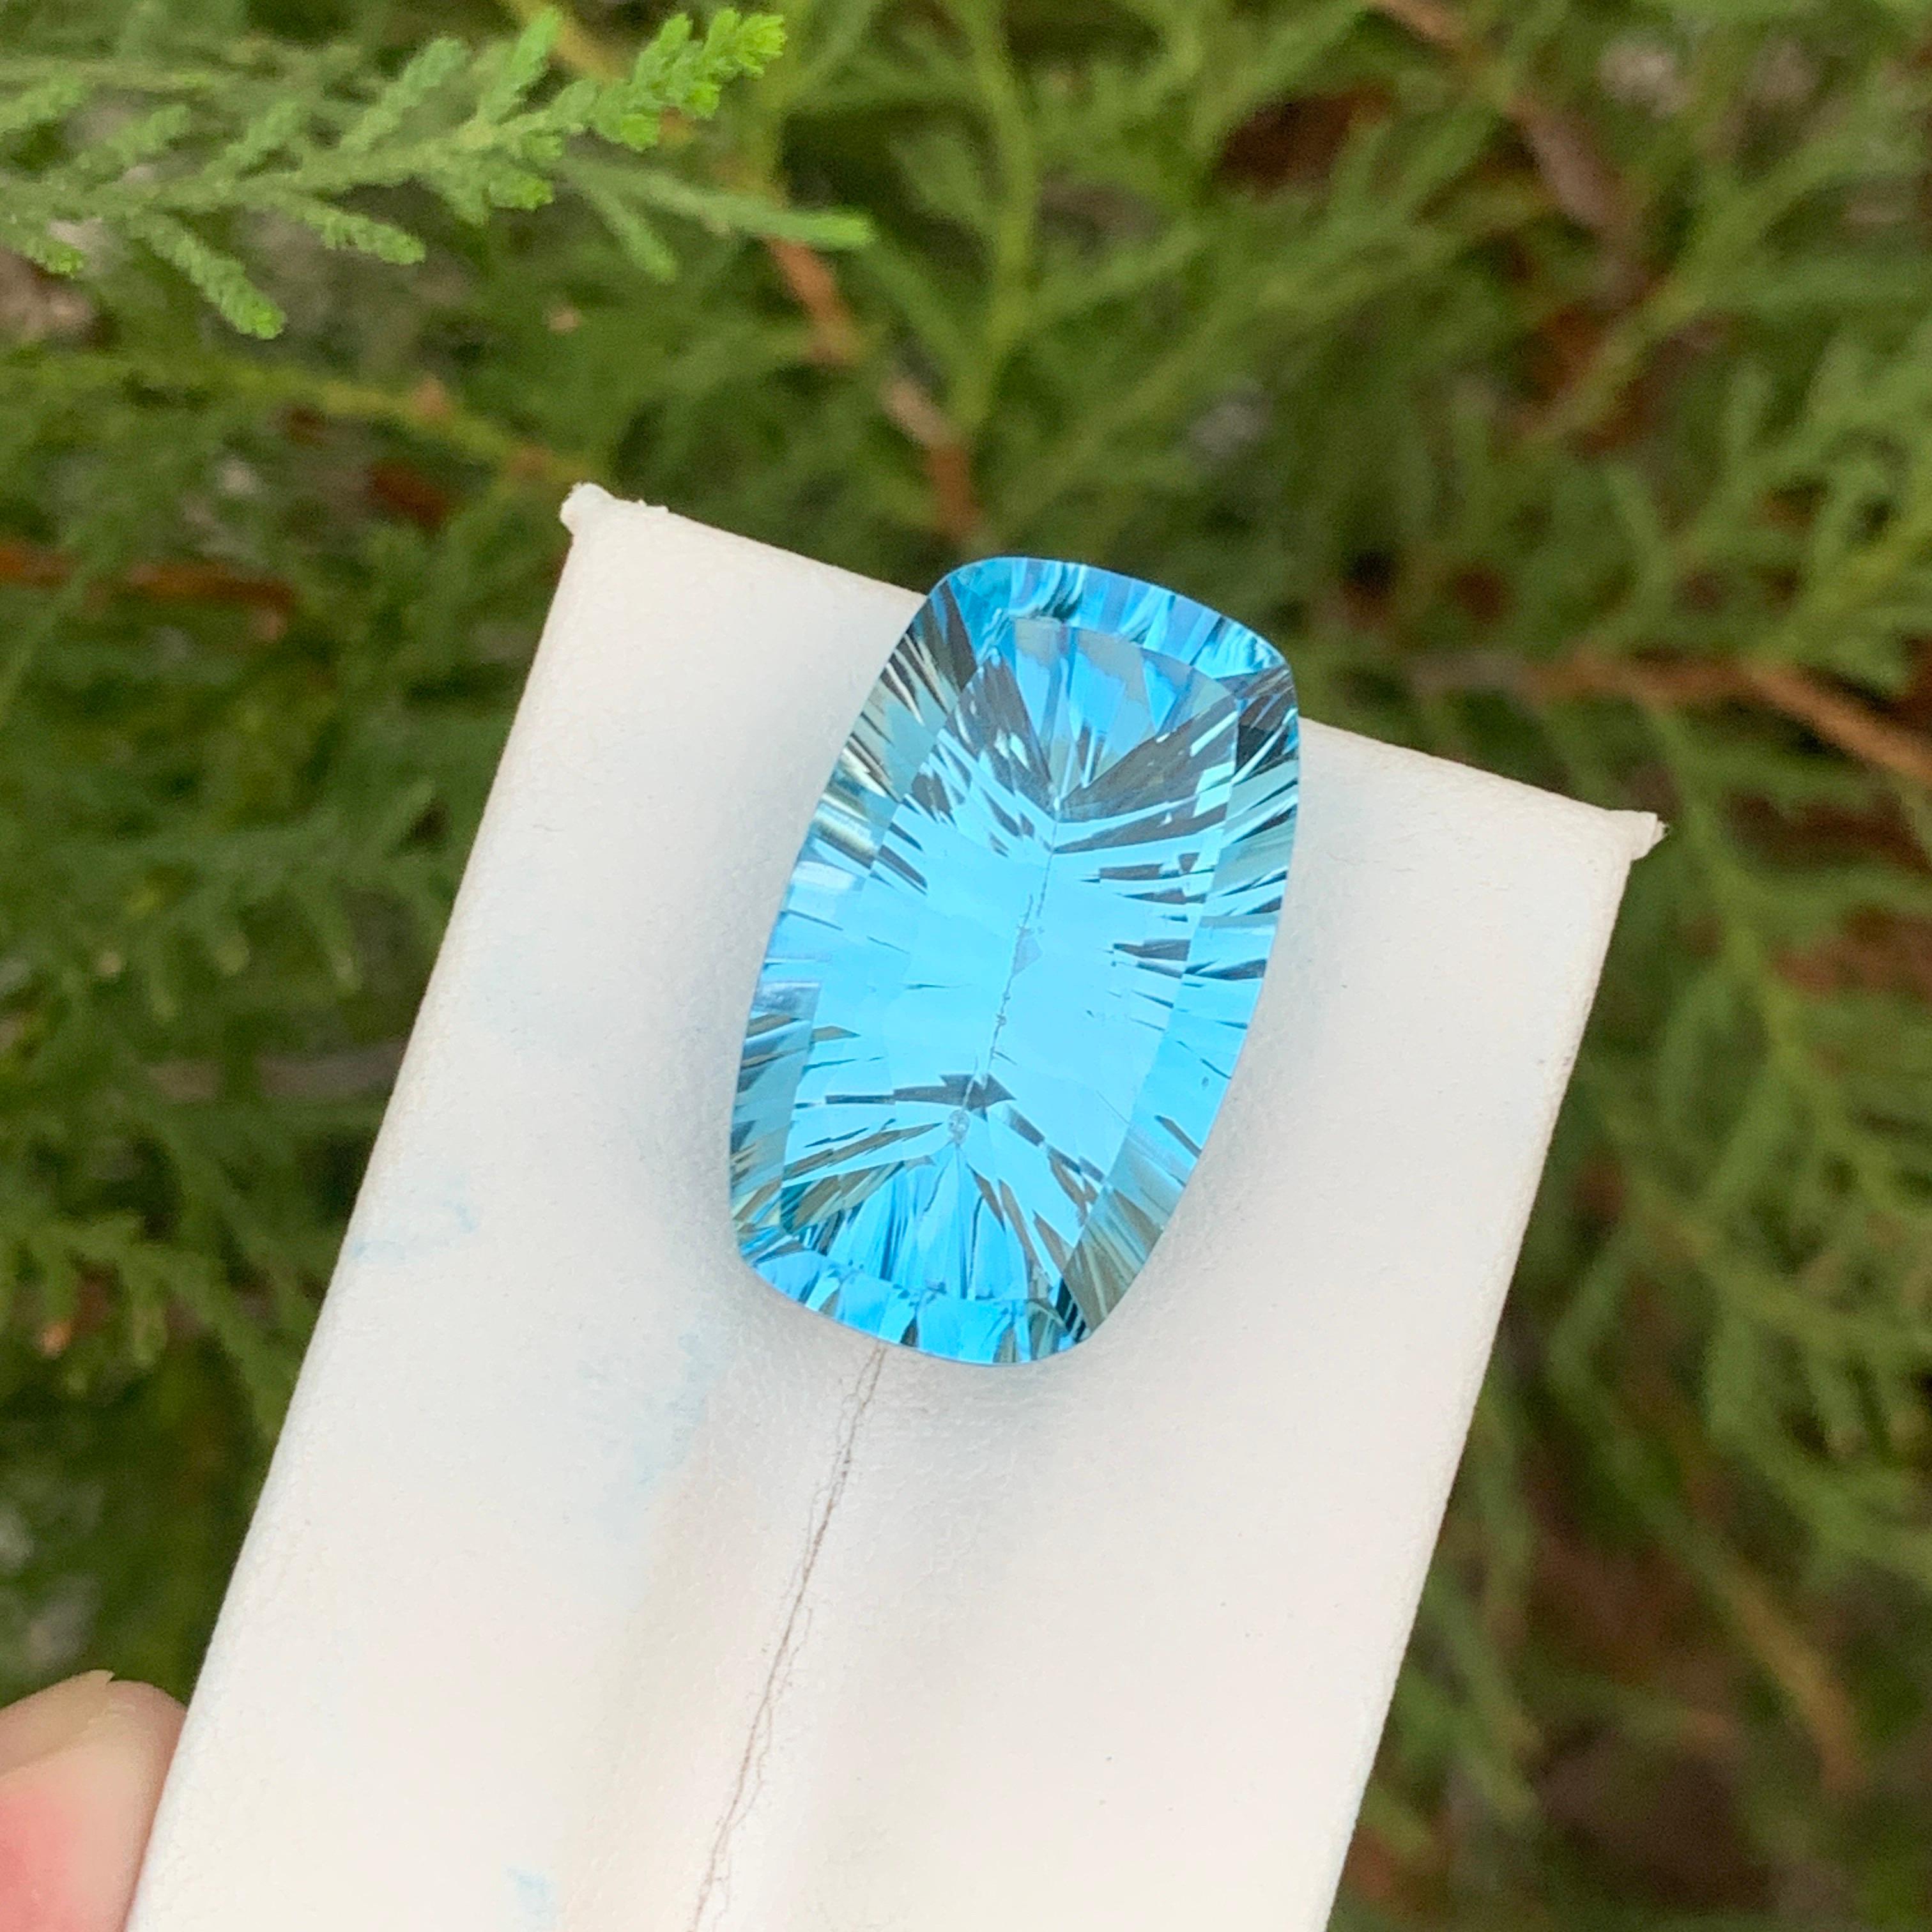 Loose Topaz
Weight: 24.70 Carats 
Dimension: 23x14.1x8.9 mm
Origin: Brazil
Color; Blue
Shape: Oval
Treatment: Non
Blue topaz is a captivating gemstone celebrated for its serene blue color and remarkable transparency. This gem has gained popularity